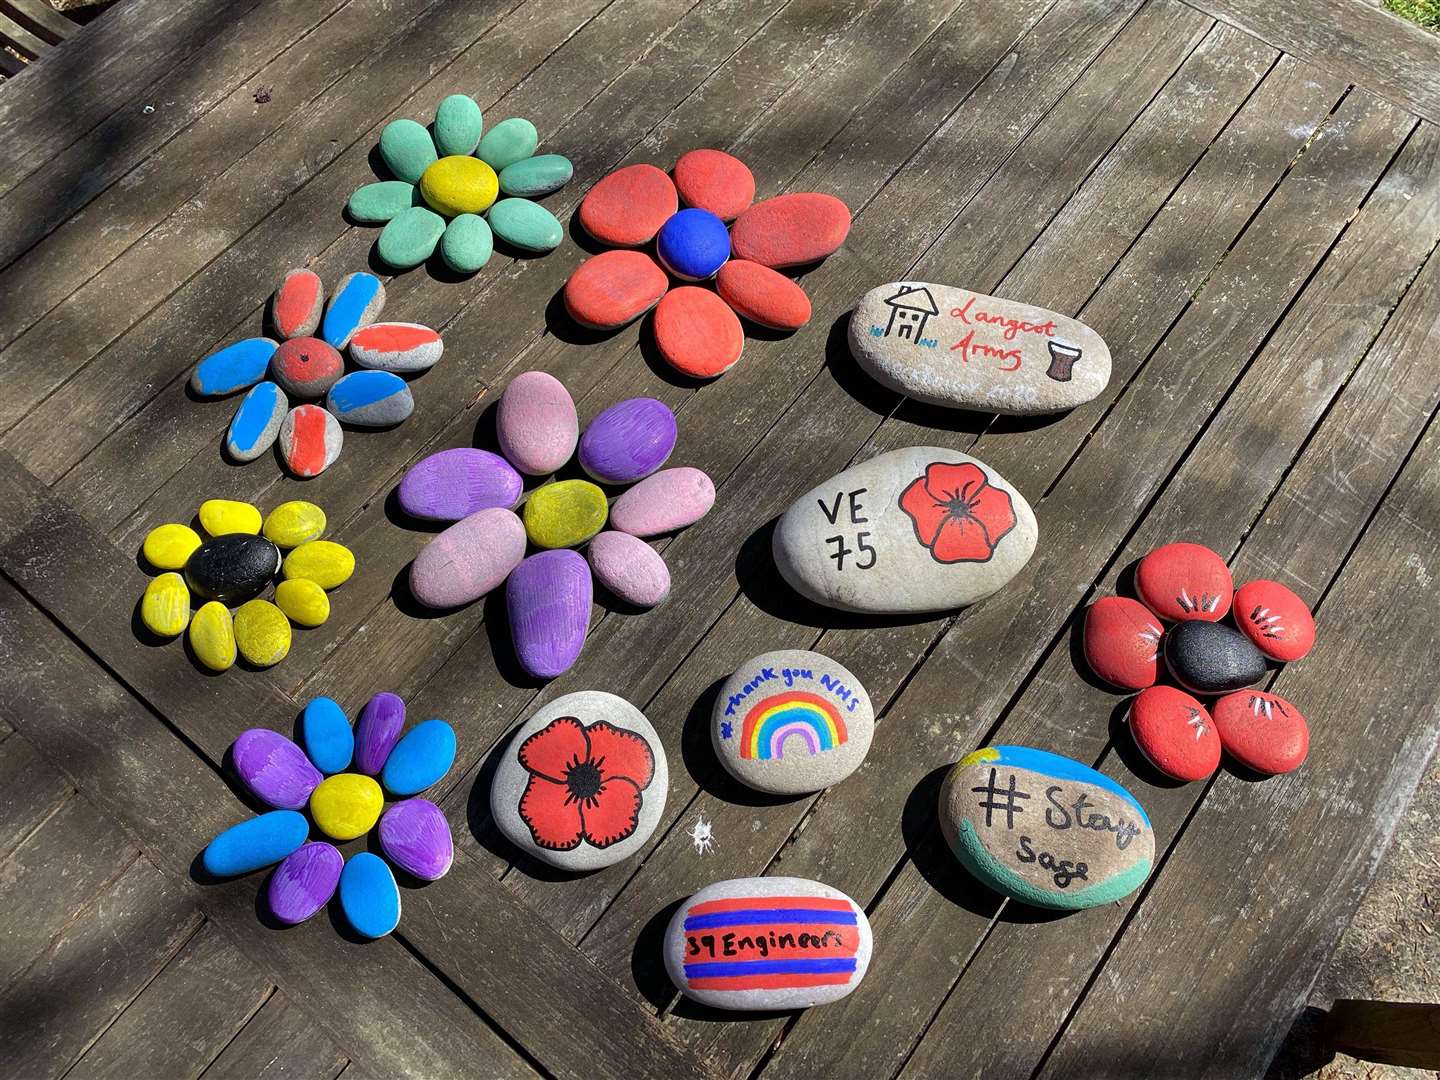 Pebbles were painted by people around Moray to mark VE Day 75.